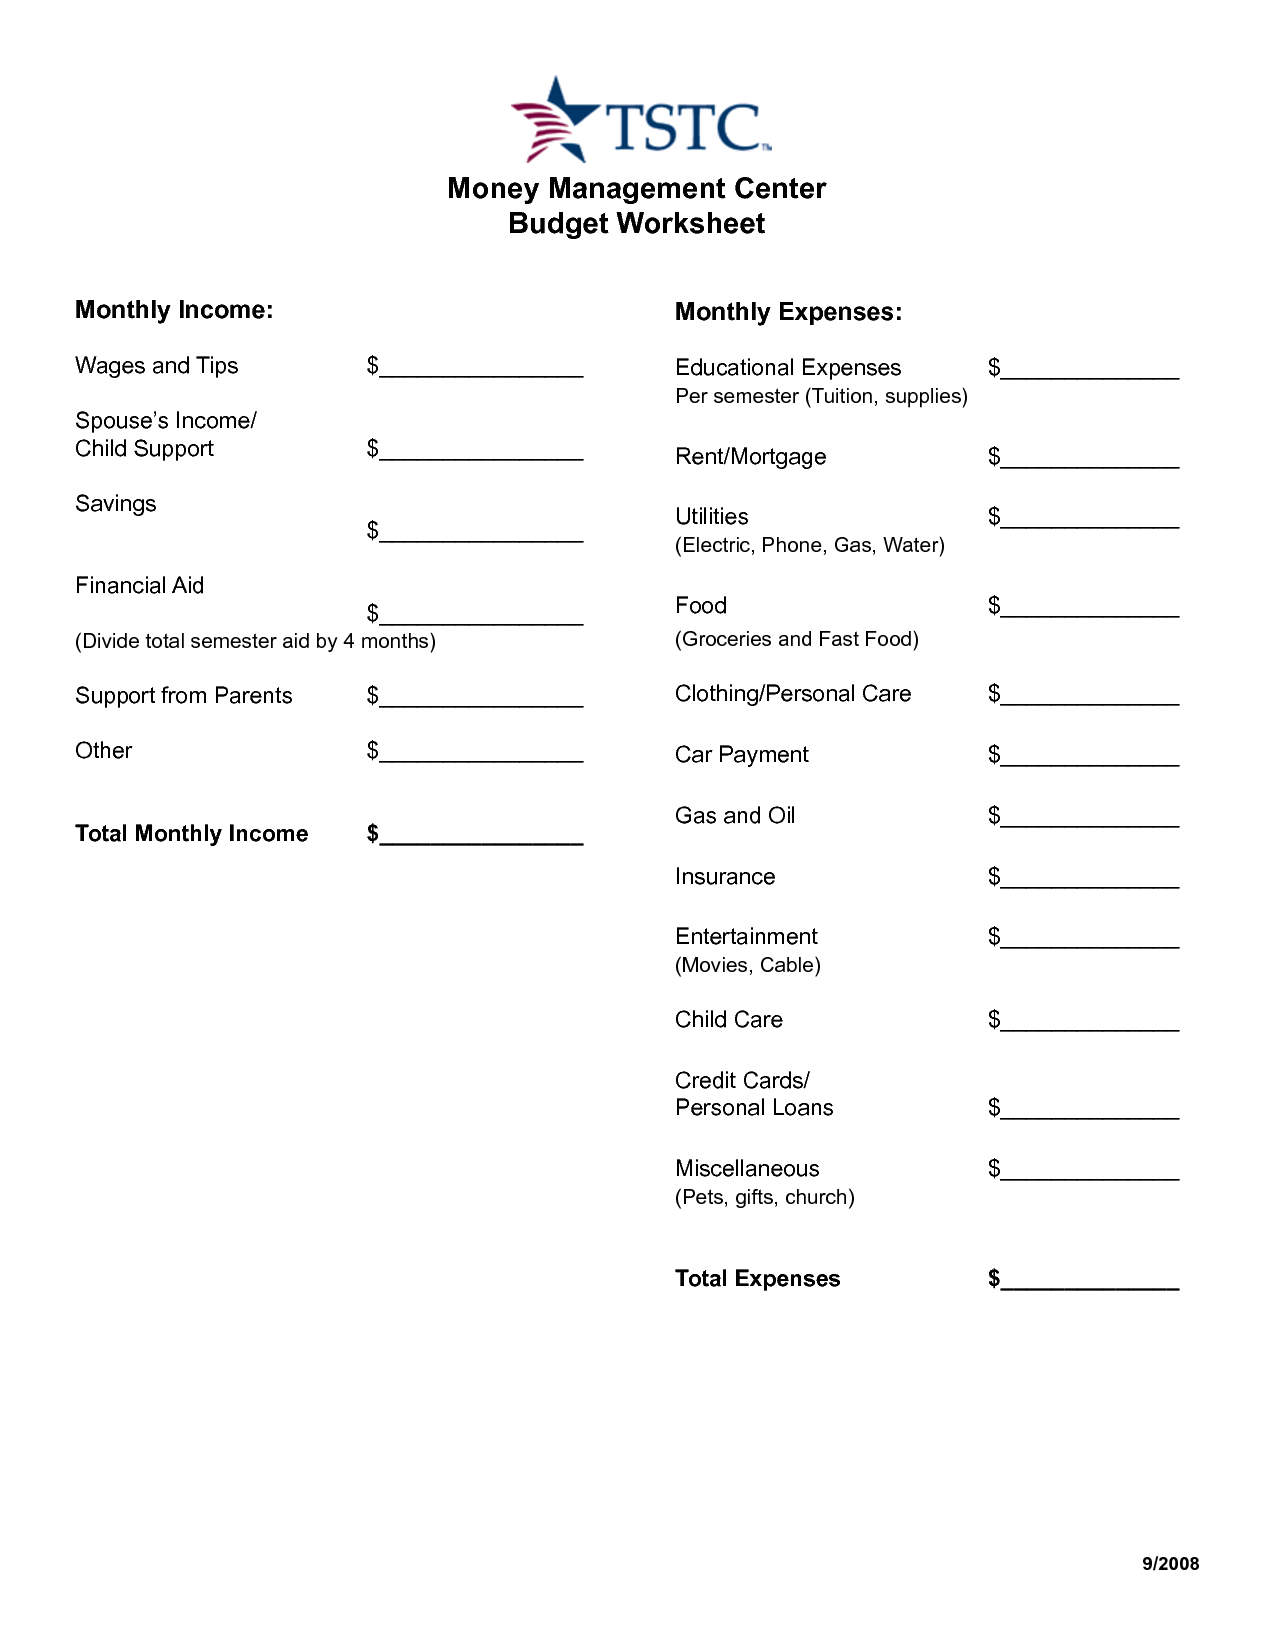 17-best-images-of-money-management-worksheets-printable-monthly-money